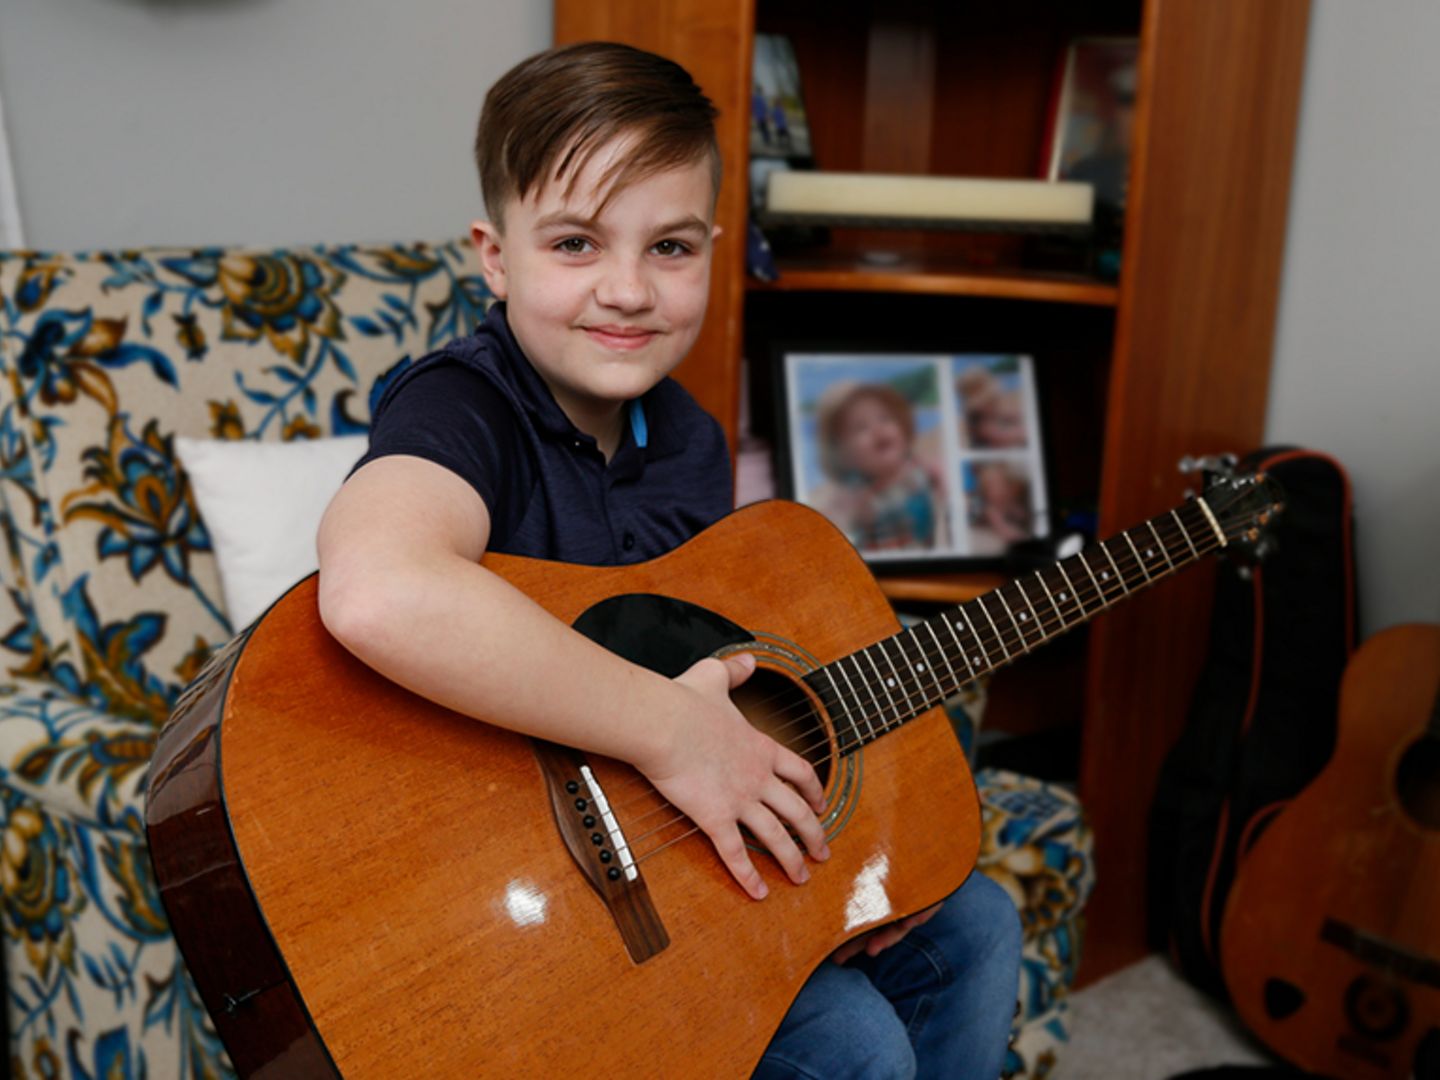 Oliver, our newest National Youth Ambassador, shows off his skills on the acoustic guitar.